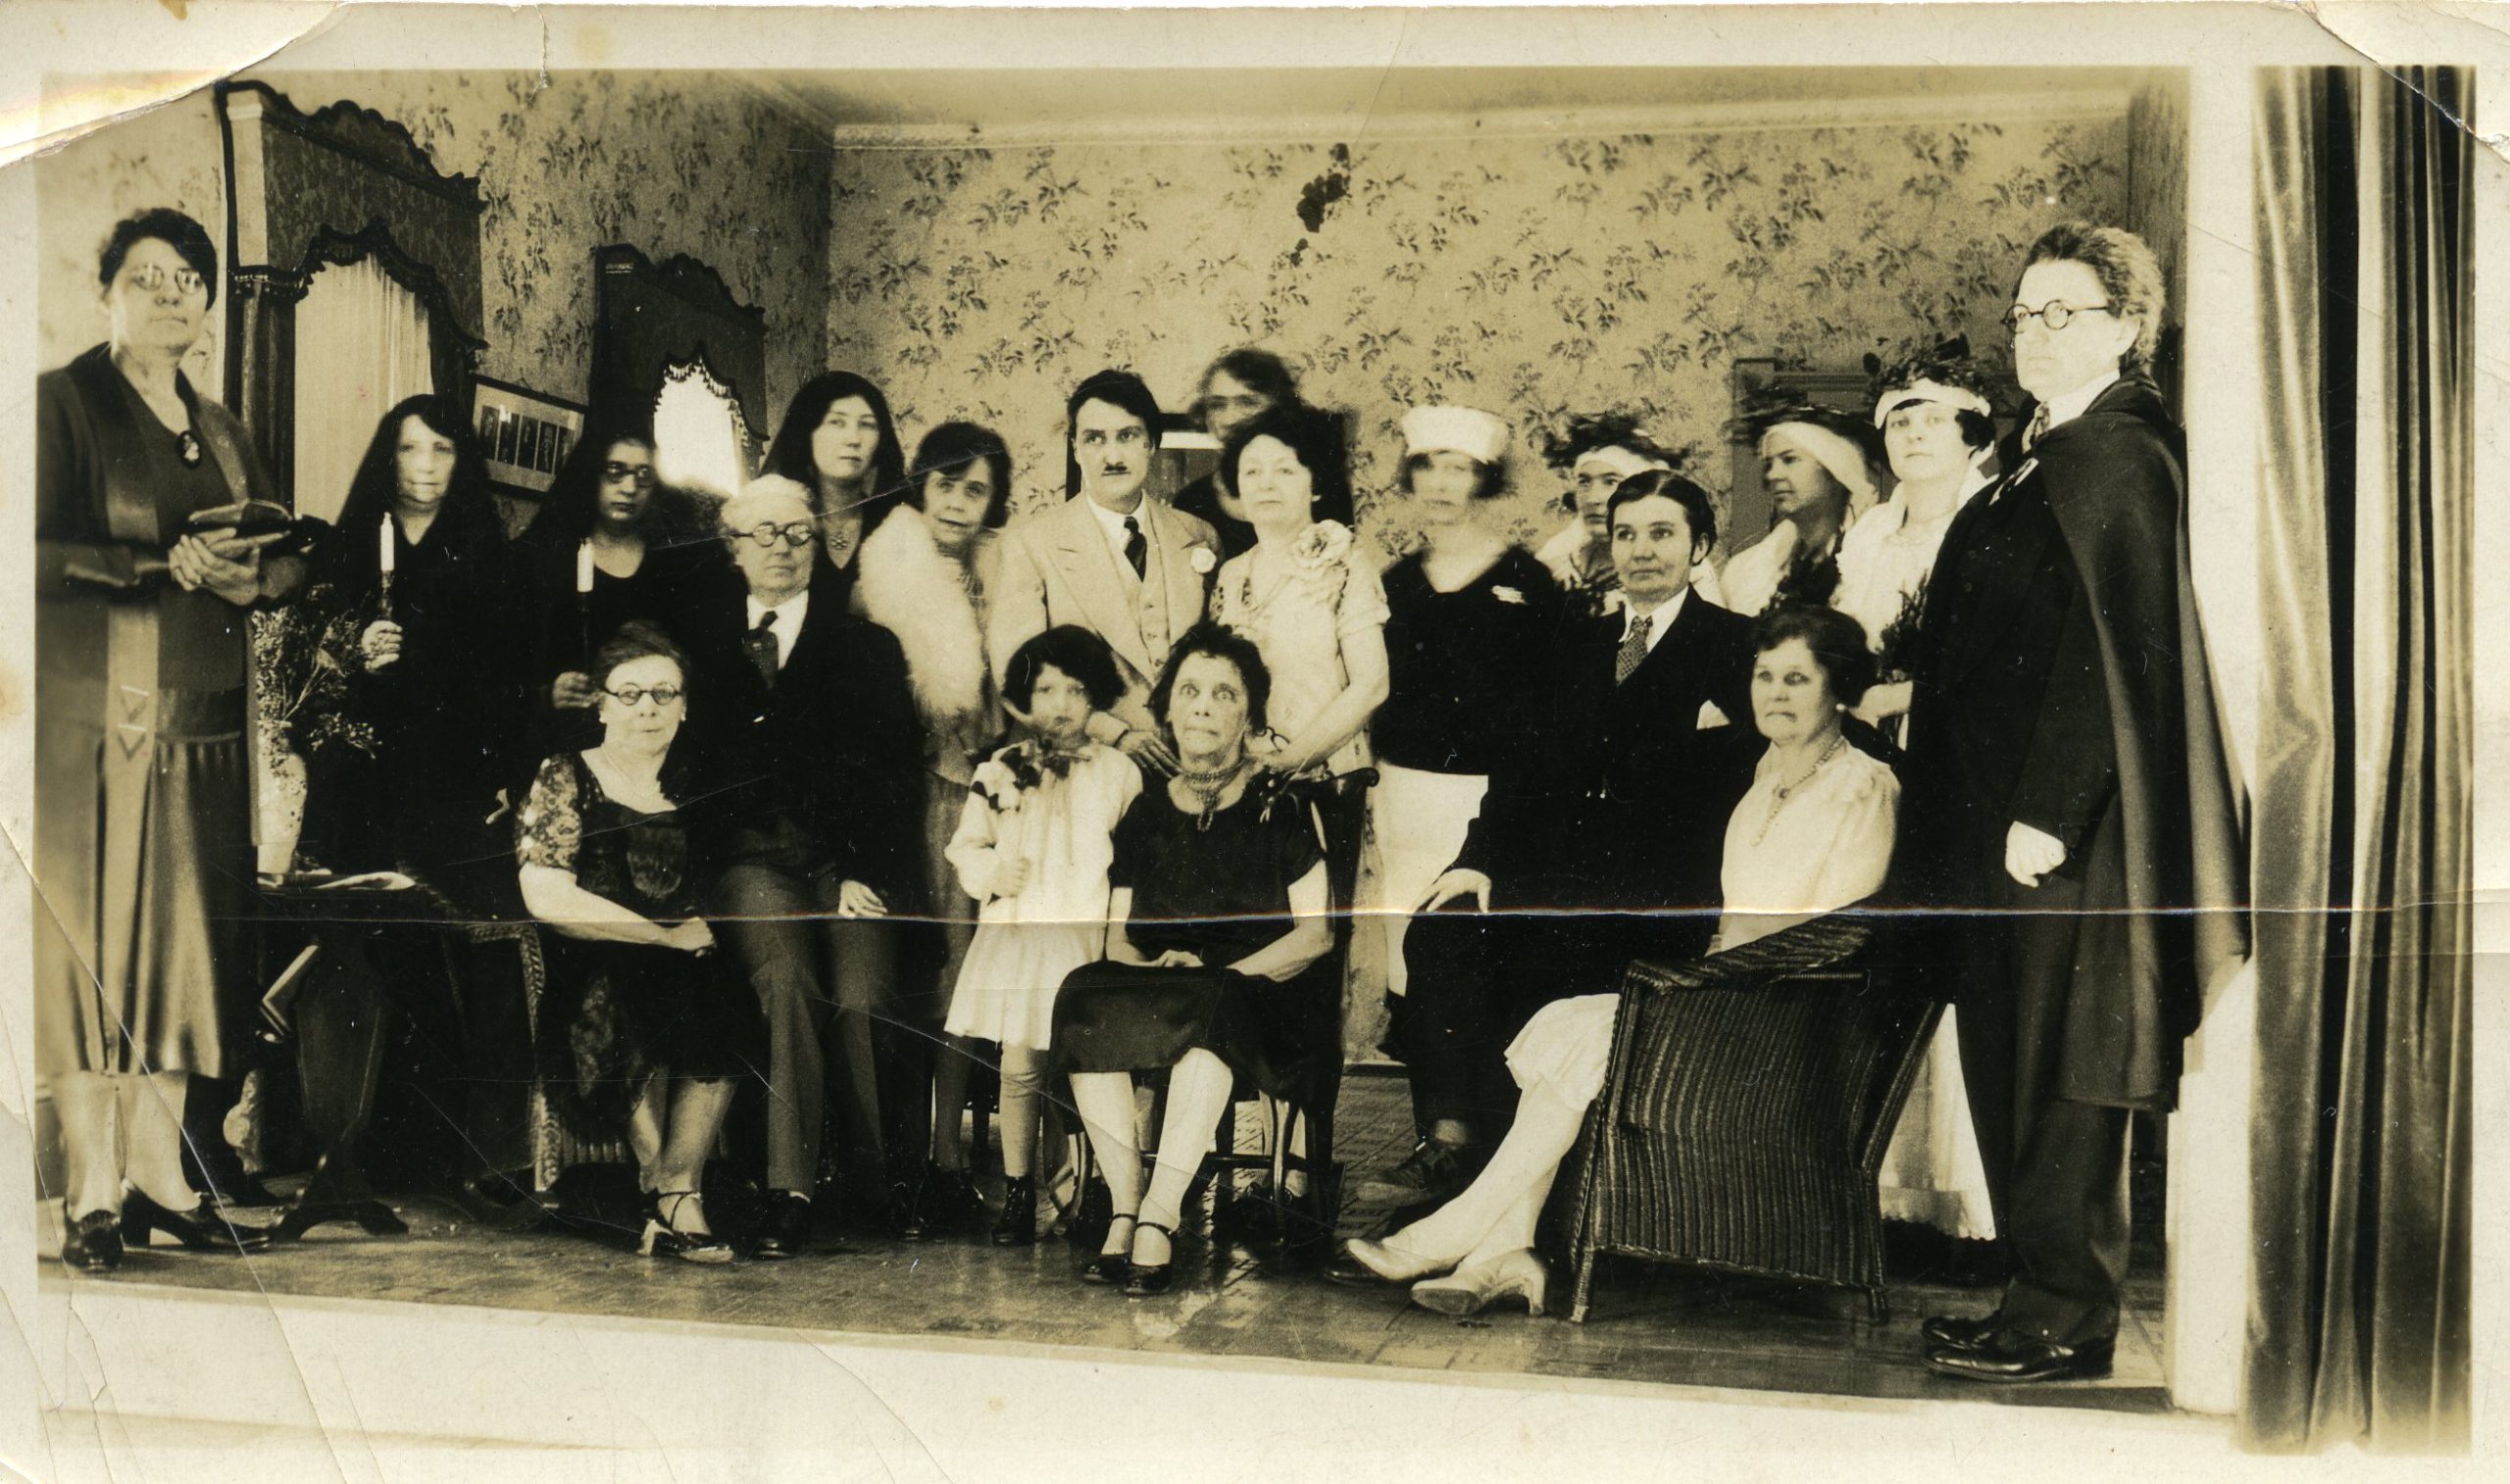 Caroyln Renfrew (center) with Hastings Woman's Club after performance of My Garden, April 1938.